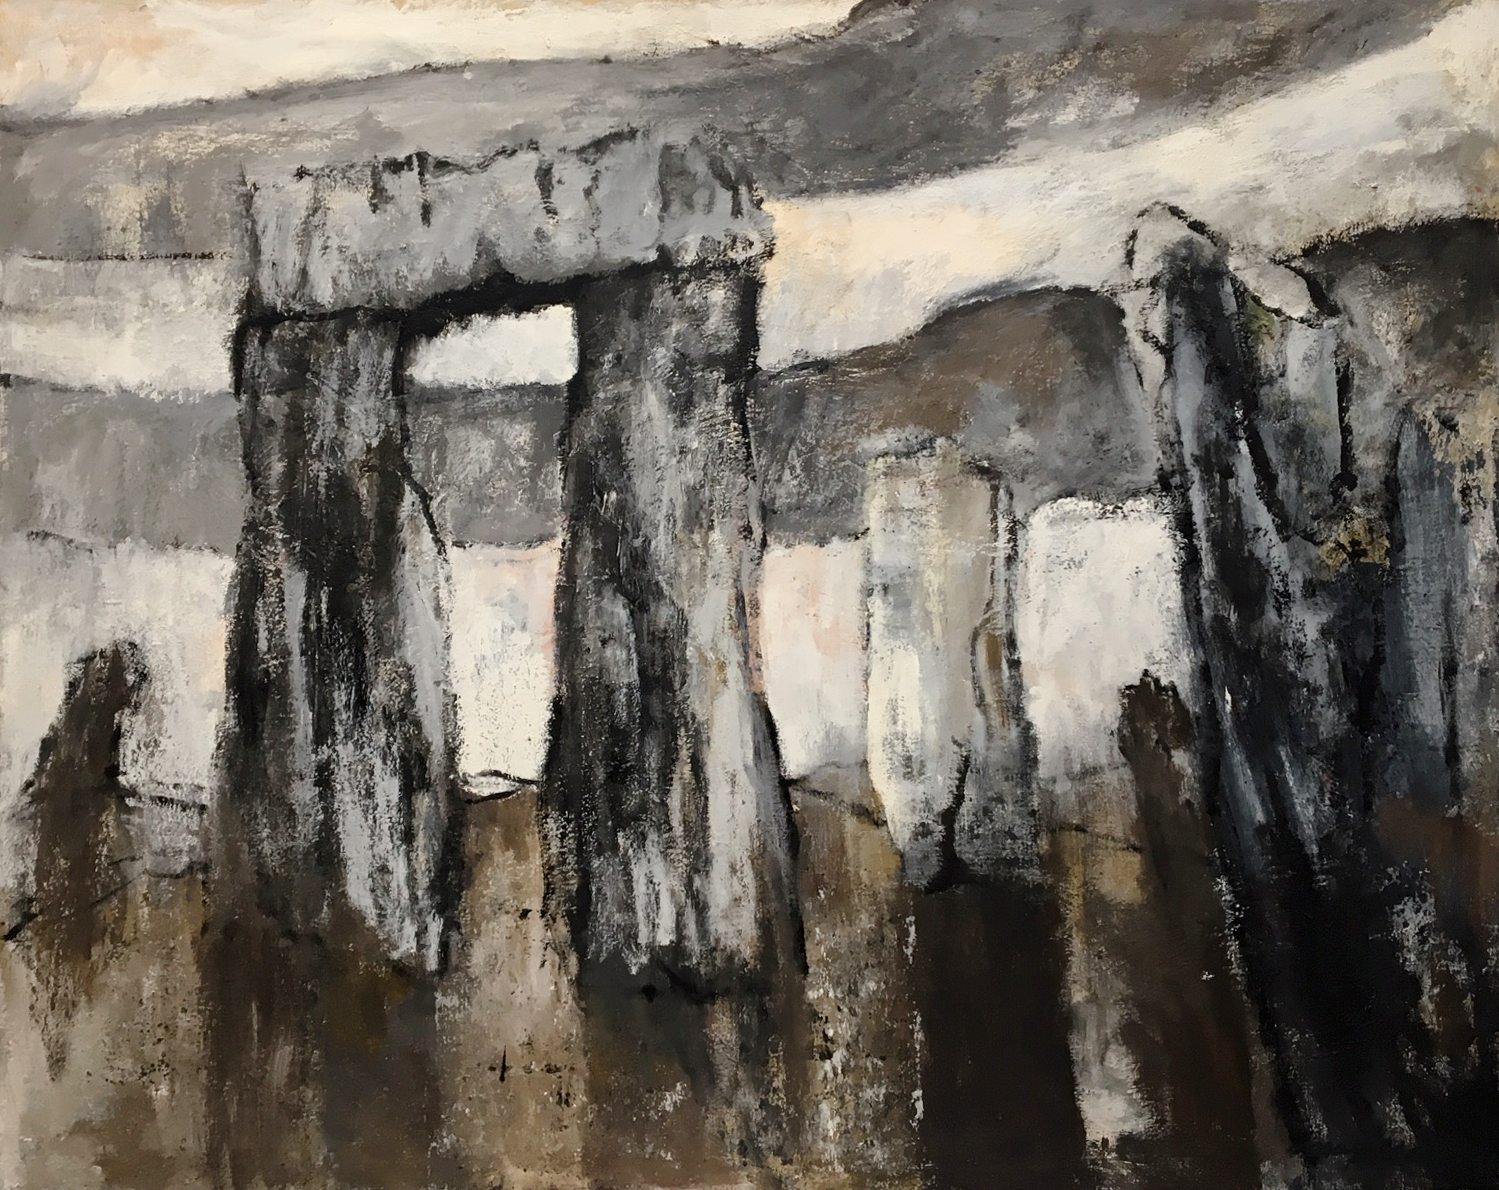 Max Kahn (Am. 1903-2005)
Stonehenge #4
Oil on canvas, 1972
40” x 50”
Signed and dated Max Kahn ‘72, lower right;
Signed on reverse
